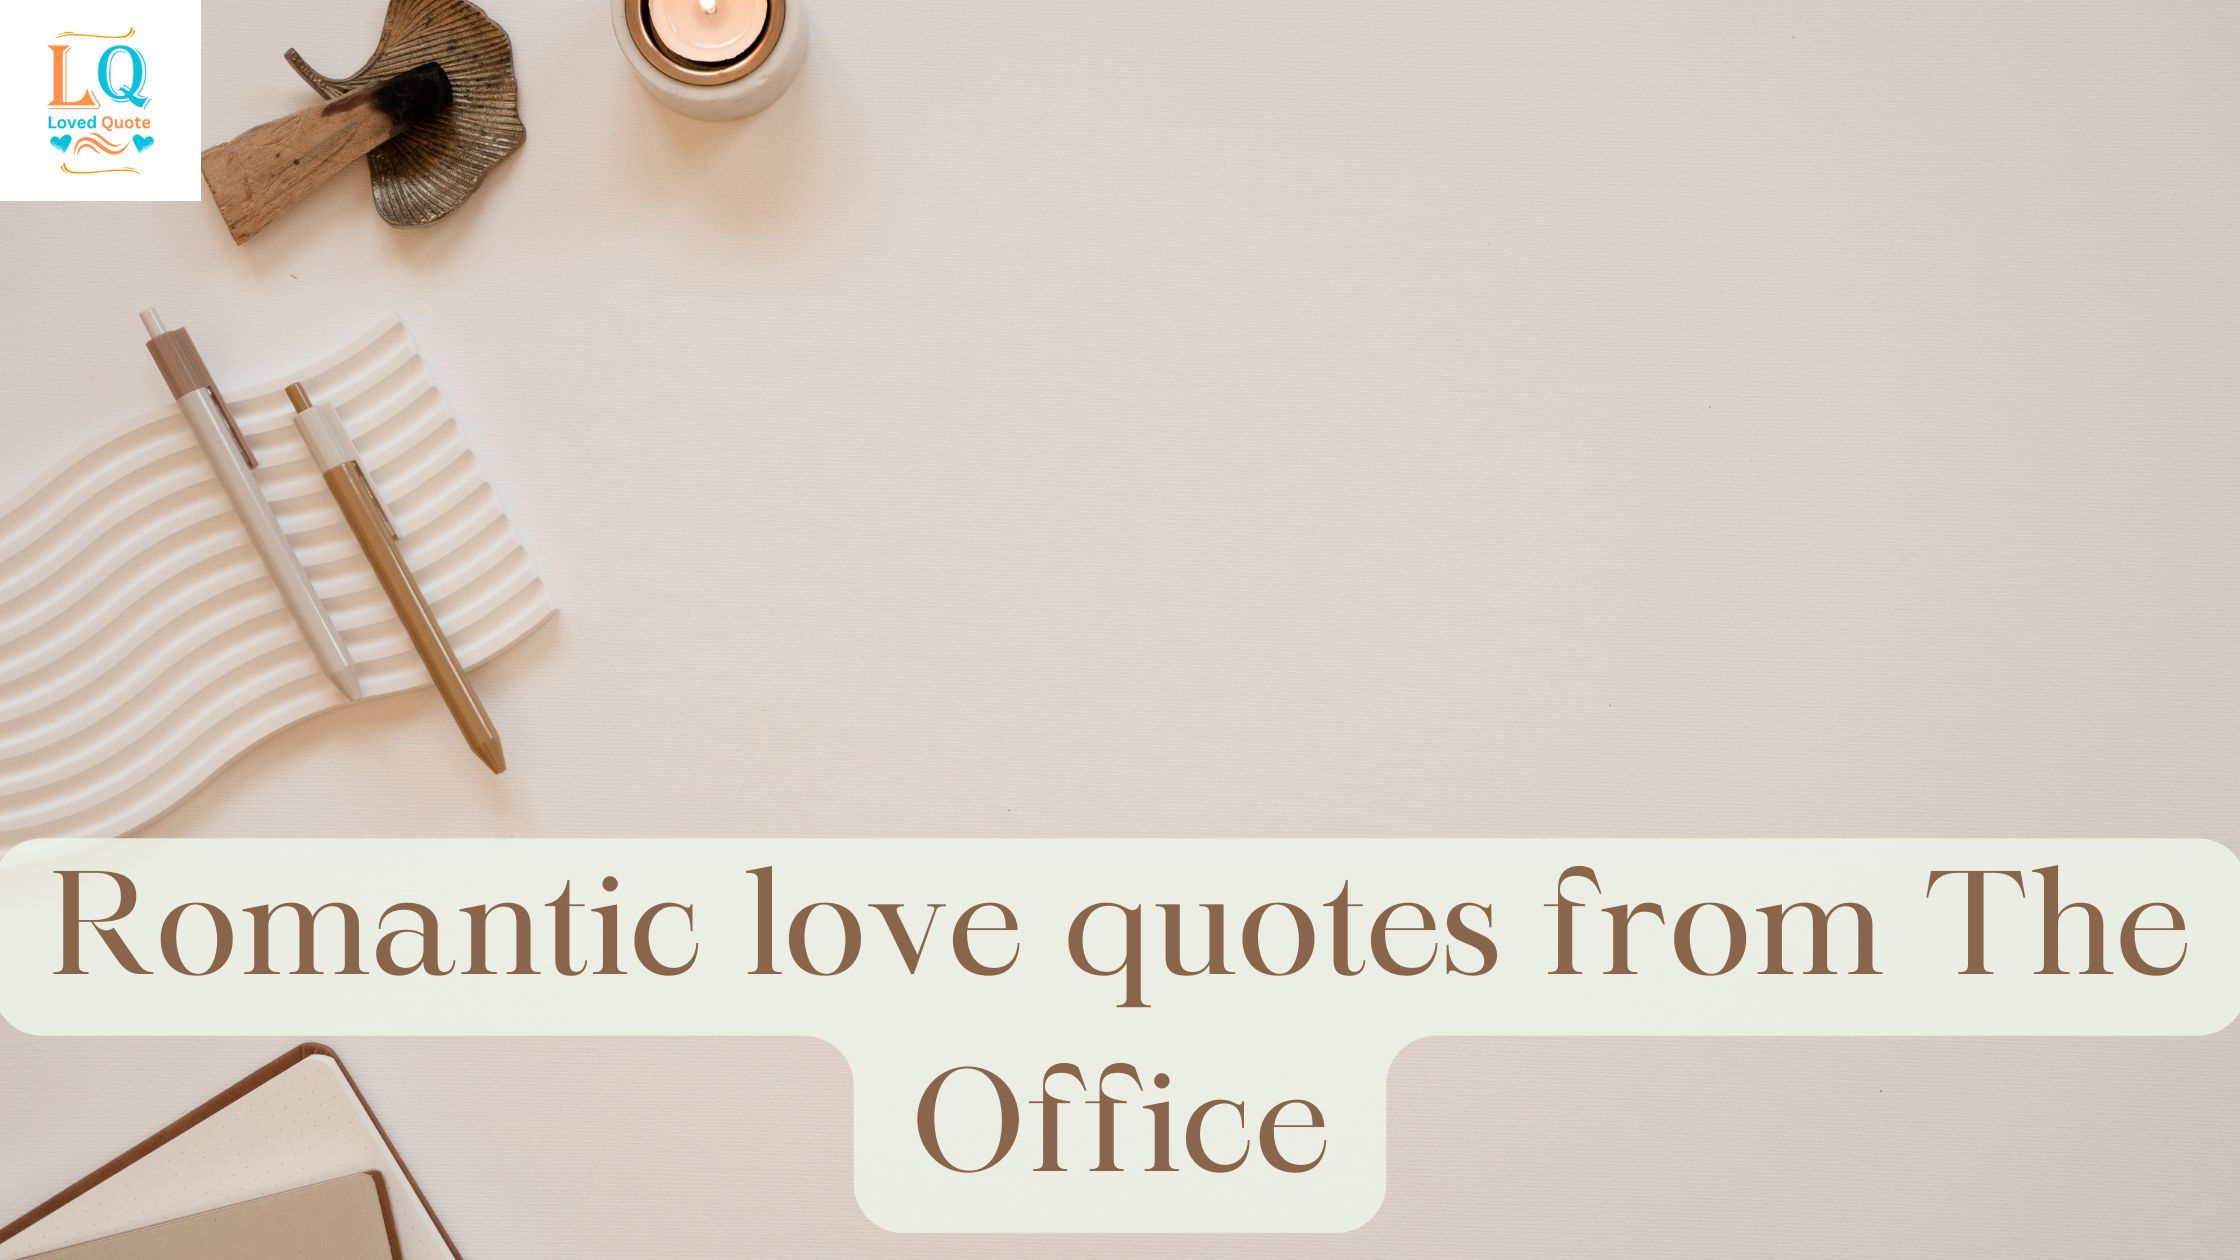 Romantic love quotes from The Office